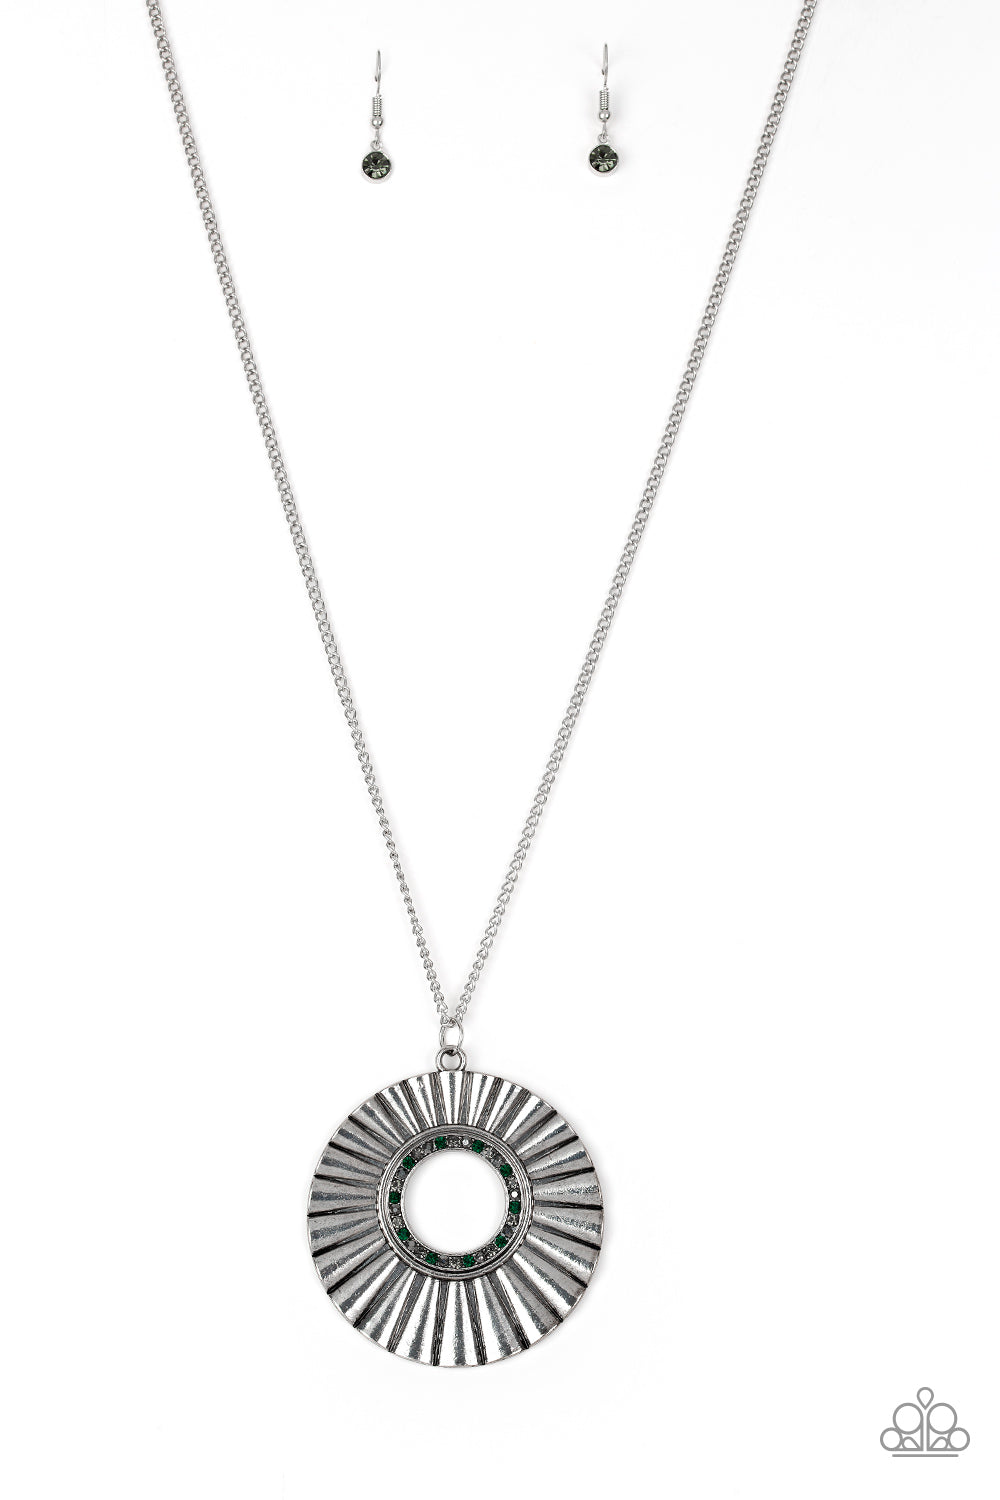 Chicly Centered Multi Long Necklace - Daria's Blings N Things